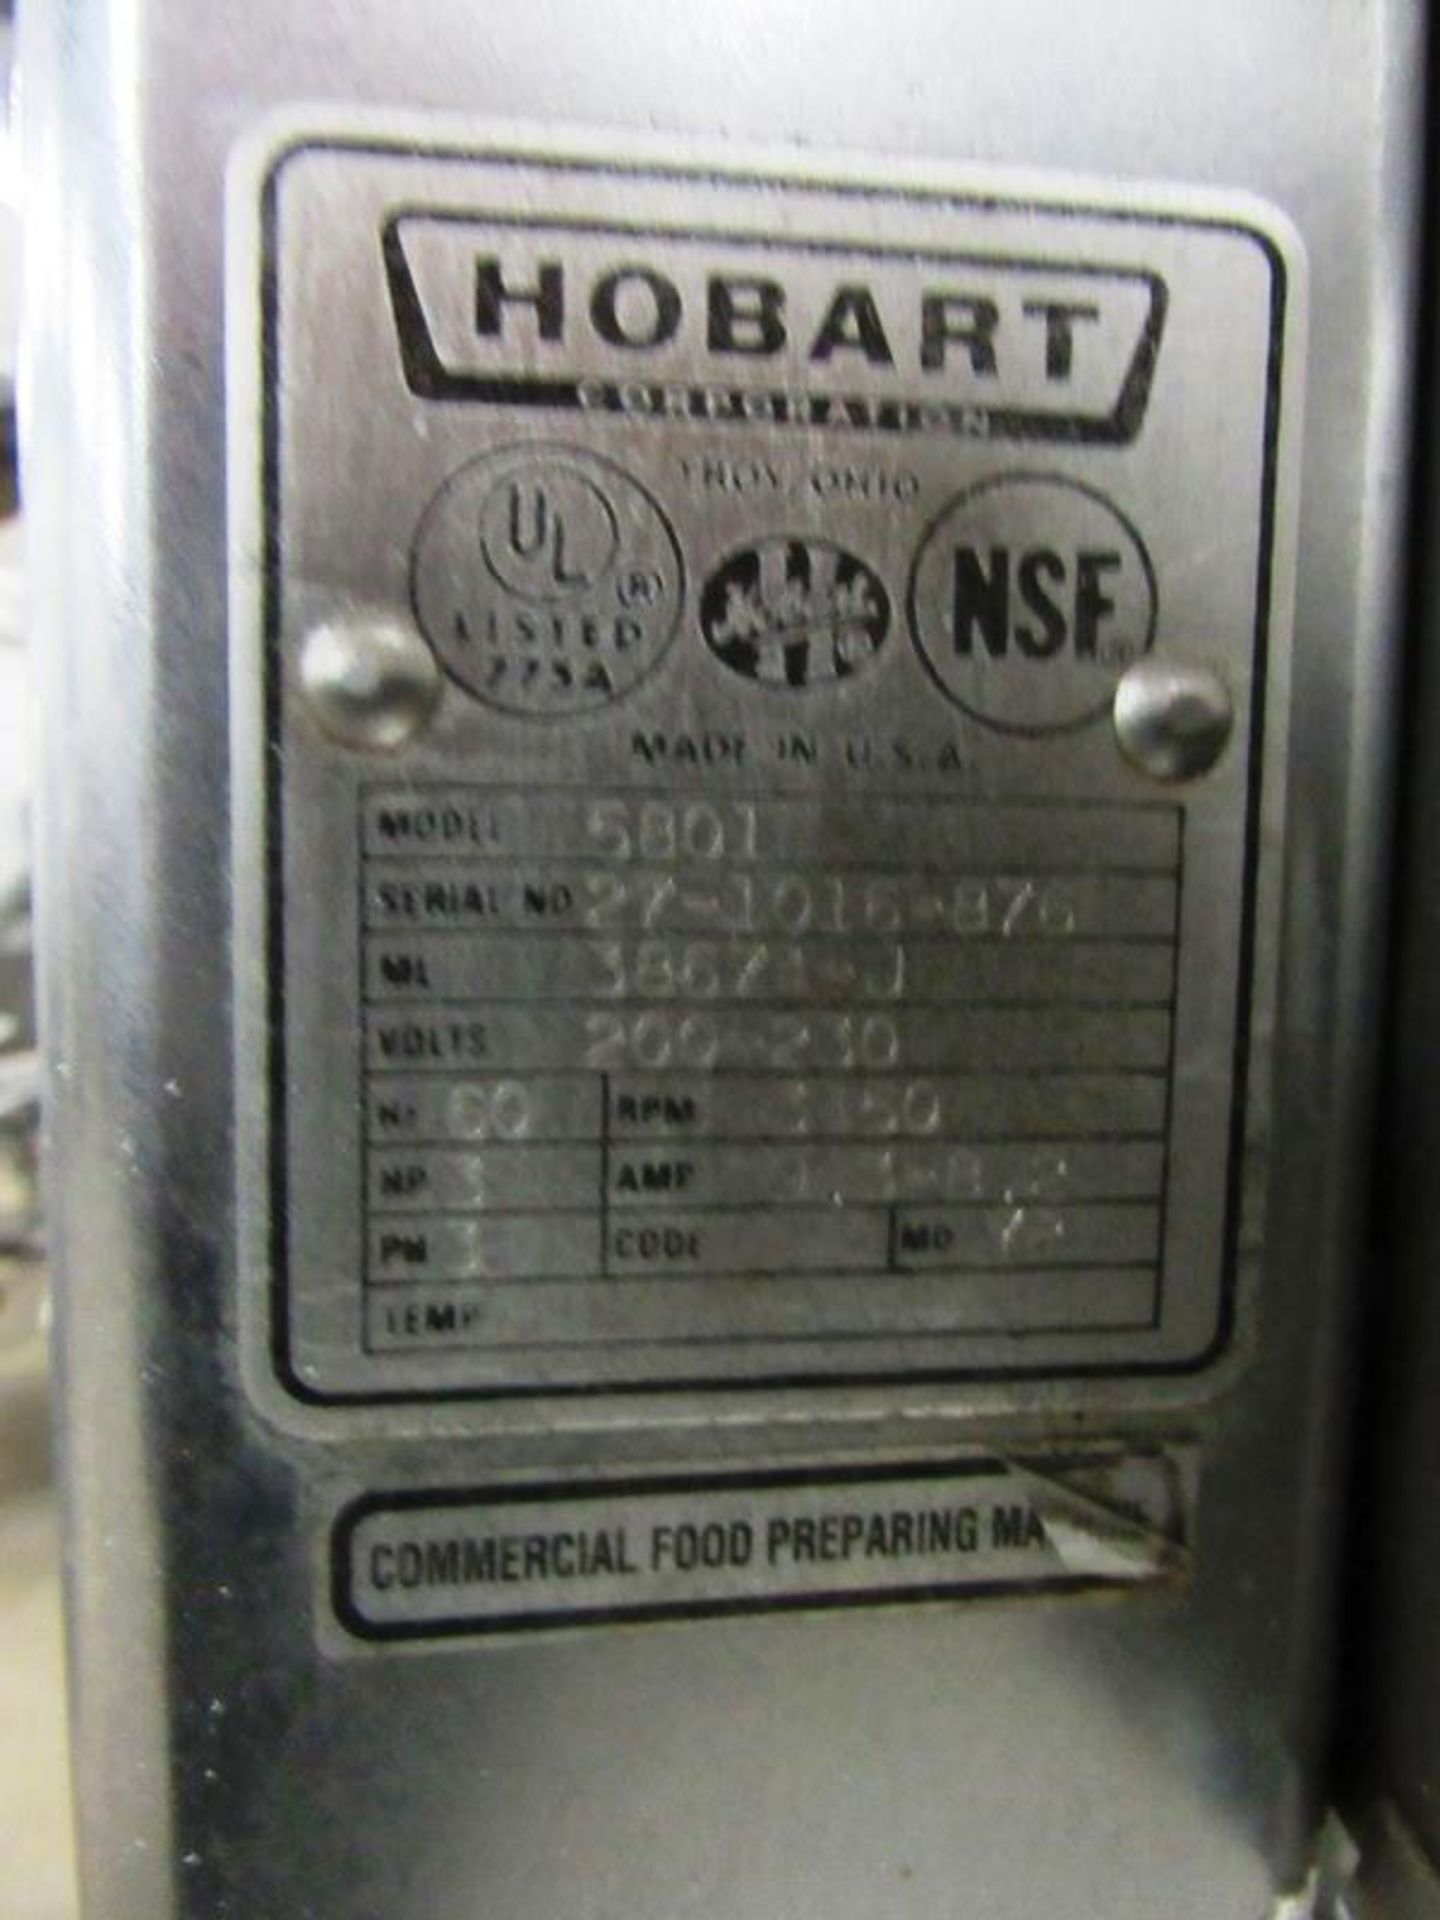 Hobart Mdl. 5801 Bandsaw, Ser. #27-1016-876, 200-230 volts, stainless steel contact parts - Image 8 of 8